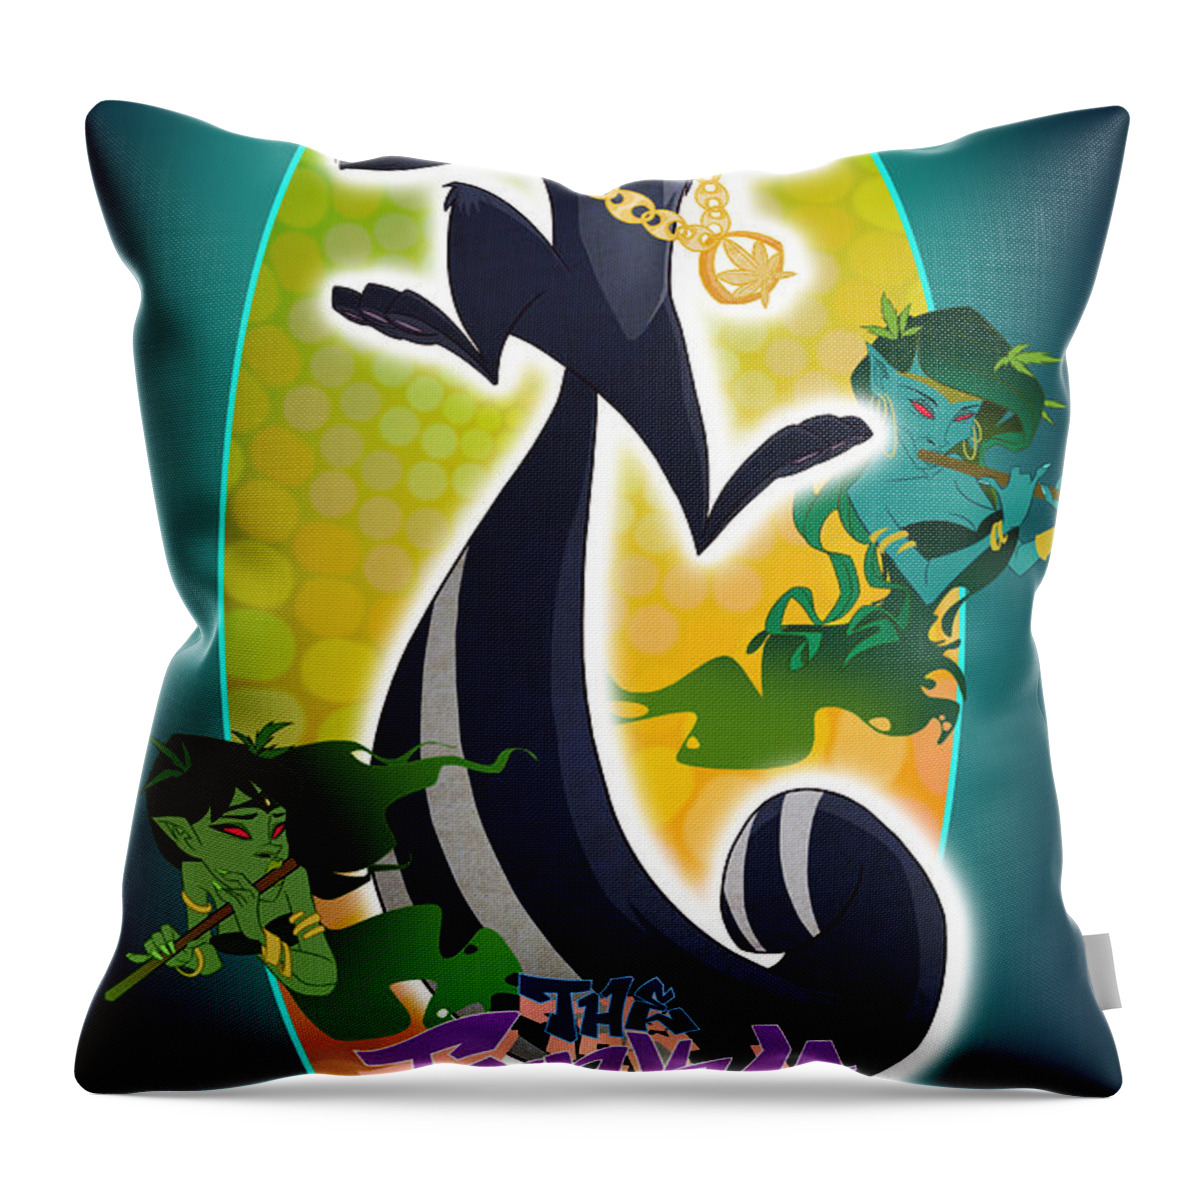 Skunk Throw Pillow featuring the digital art Skunk Funk by Nelson Dedos Garcia